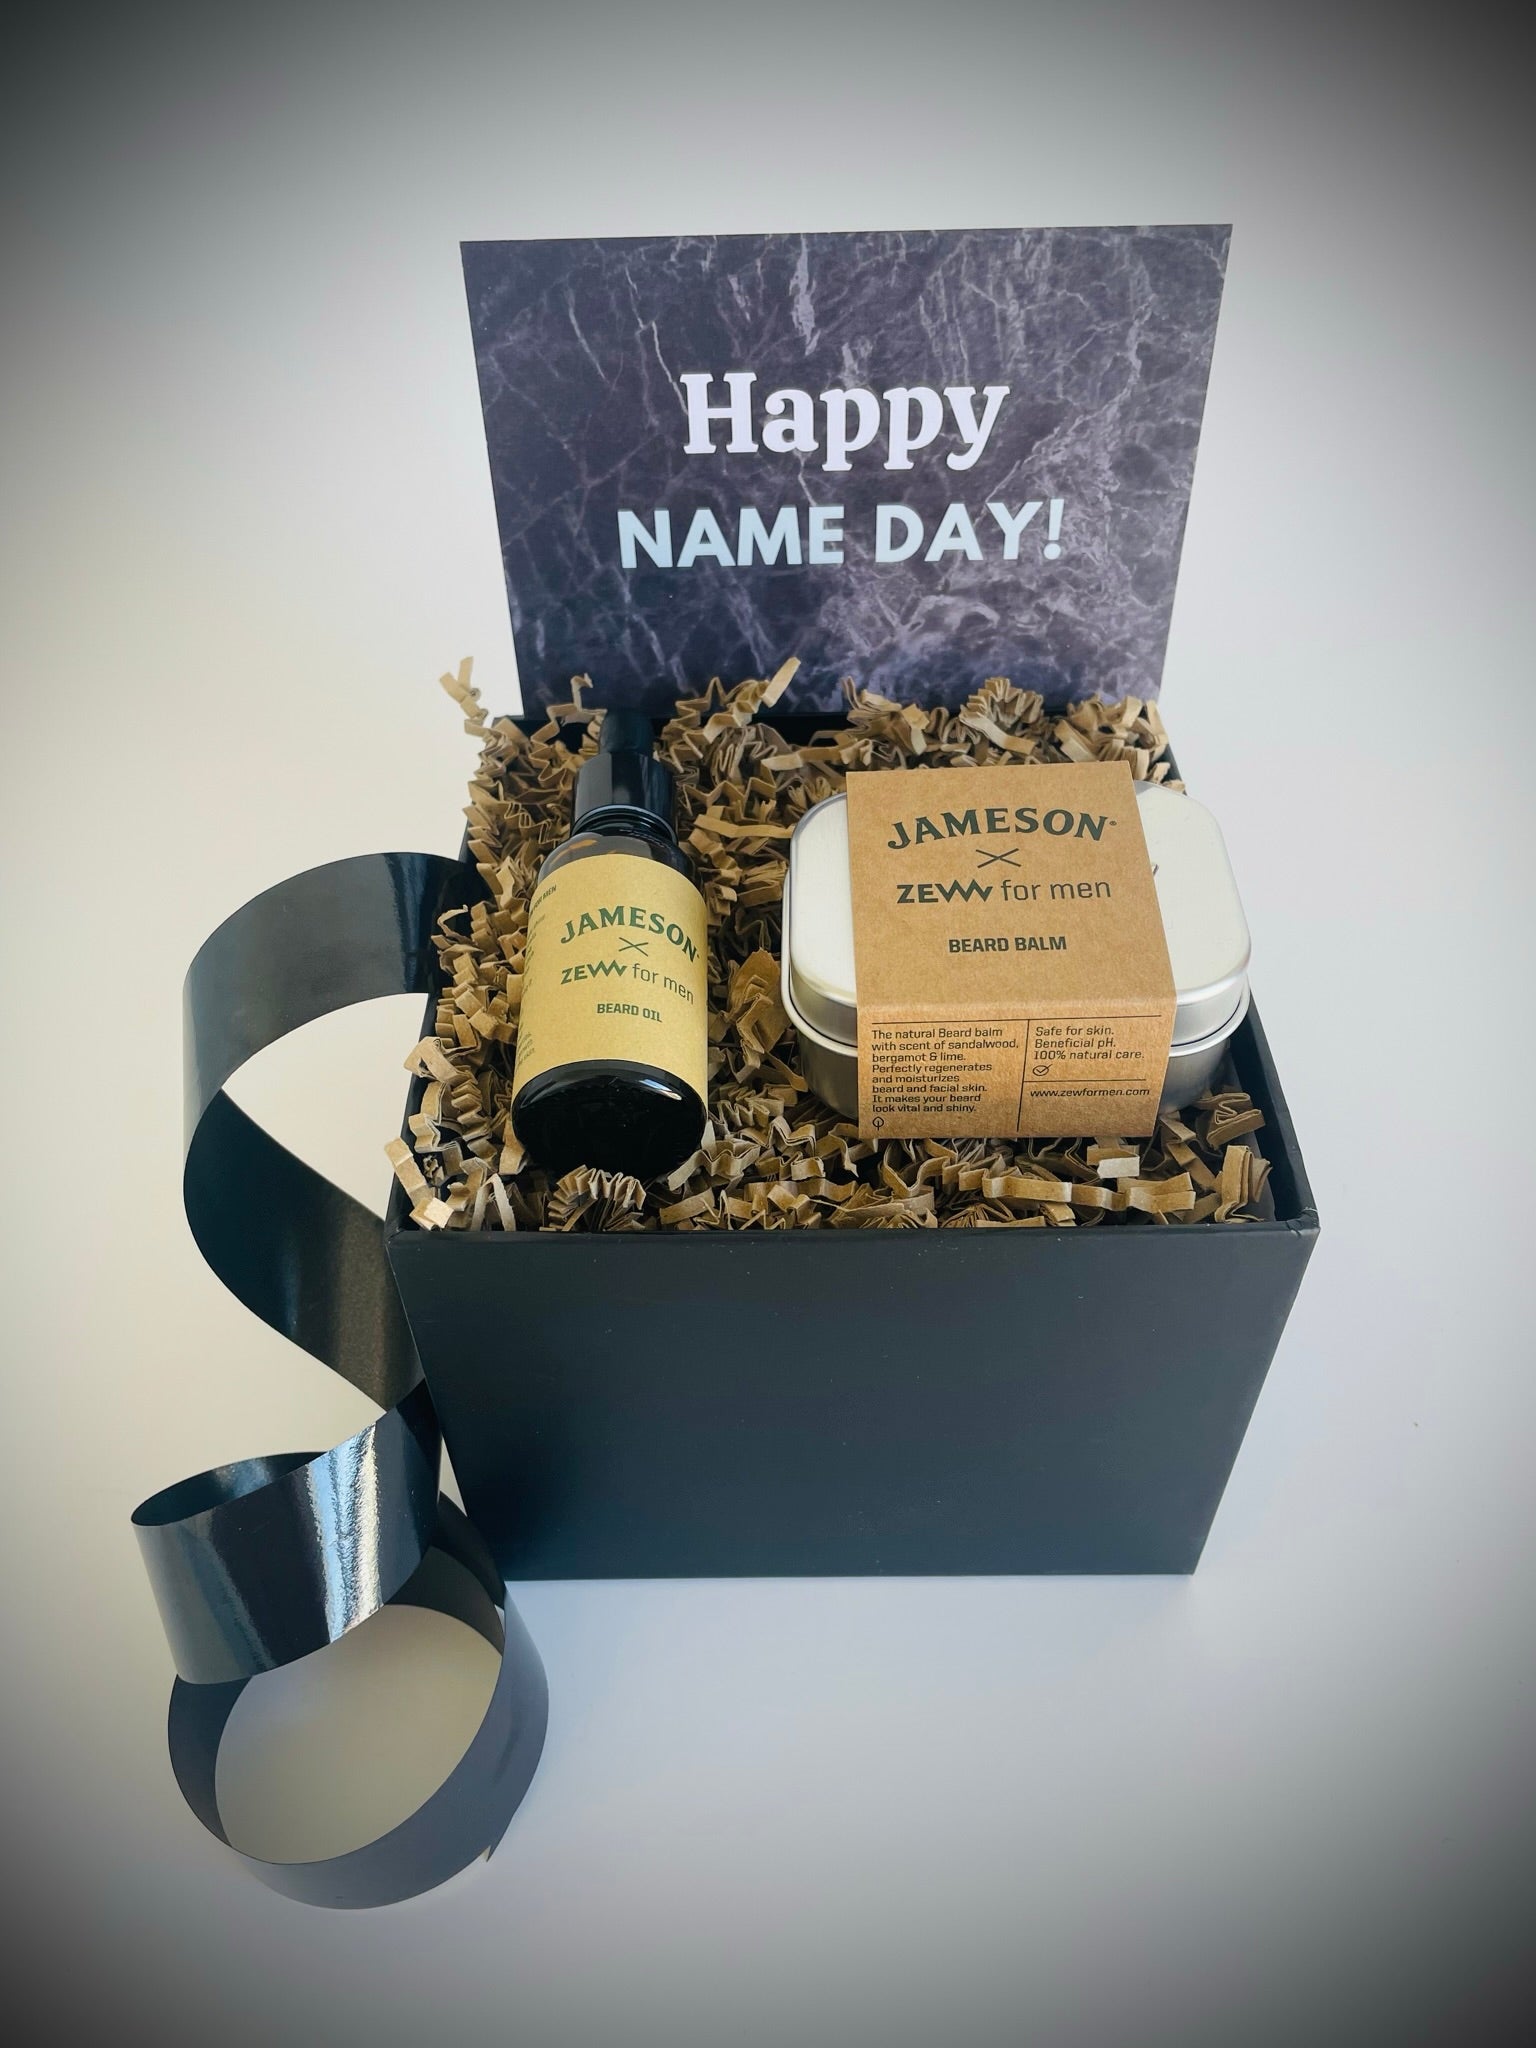 happy-name-day-gift-box-build-a-box-cyprus